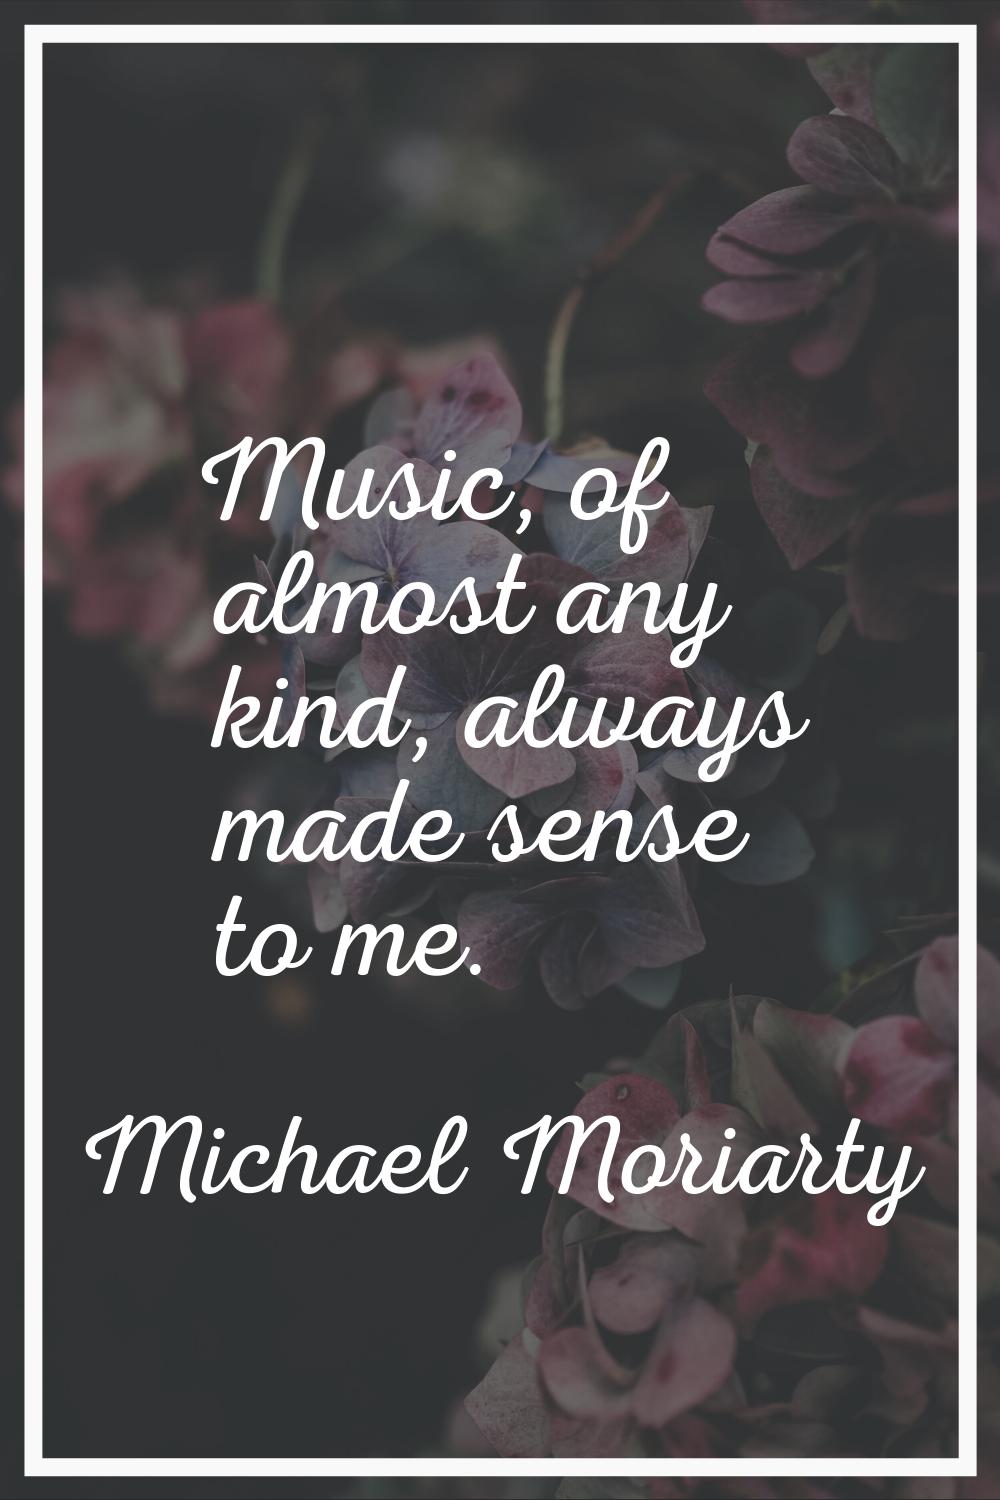 Music, of almost any kind, always made sense to me.